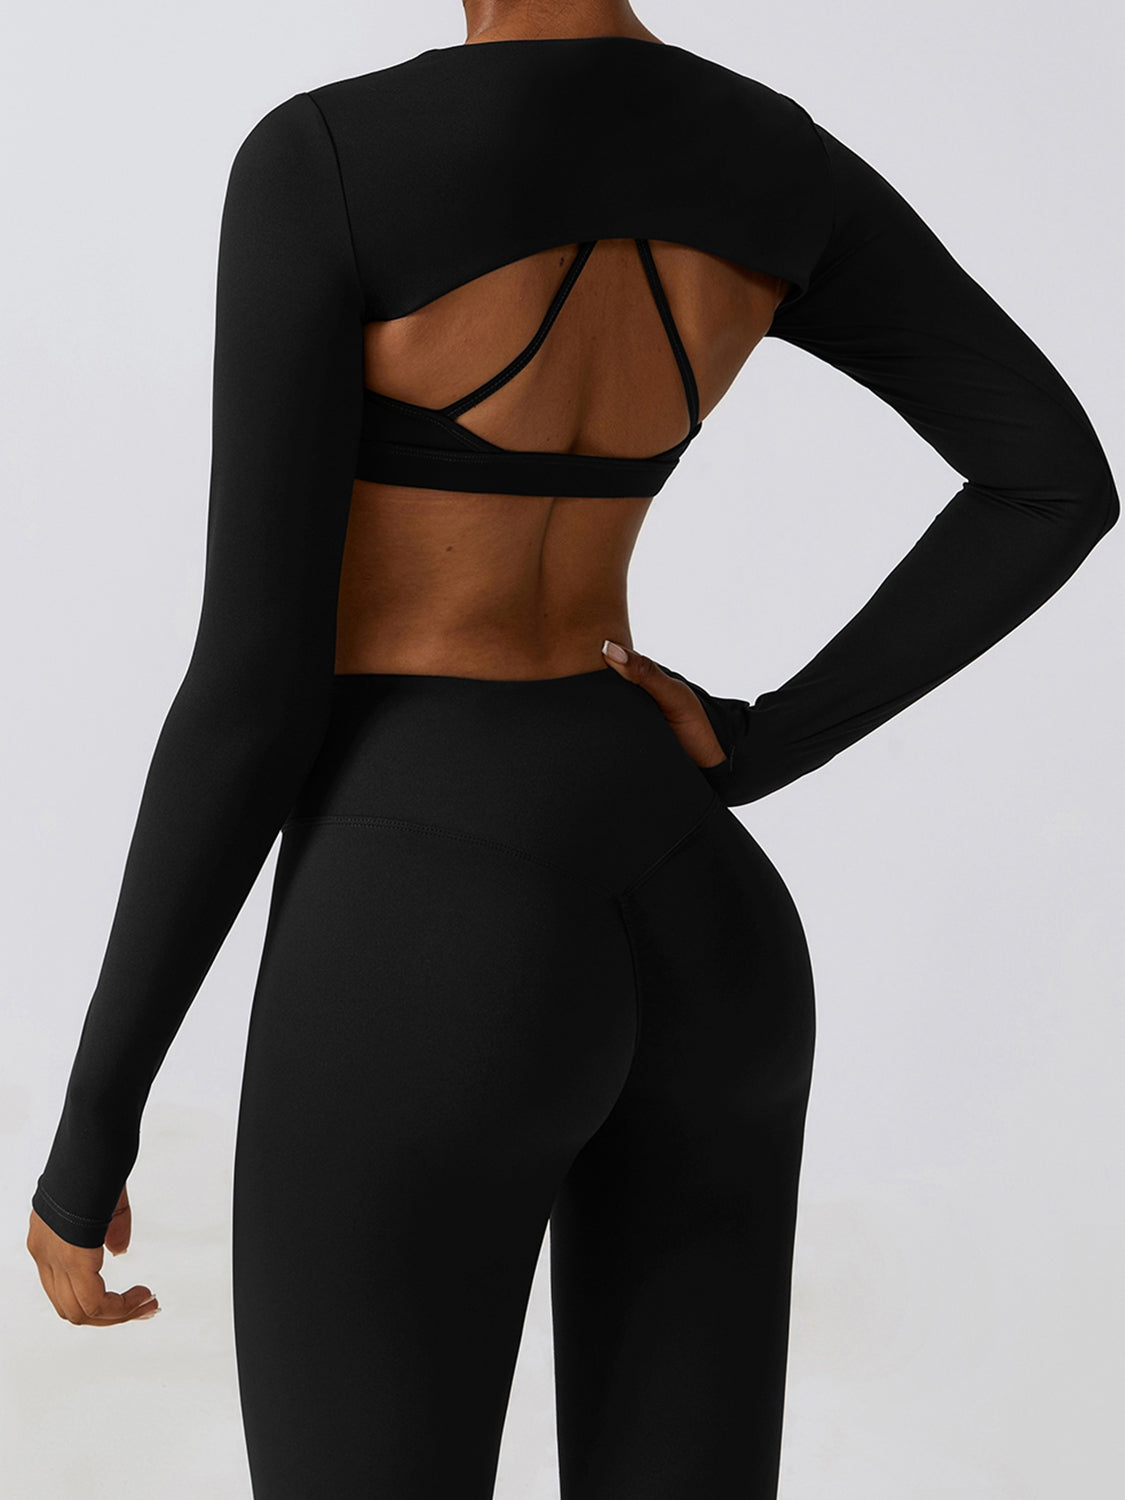 a woman in a black sports bra top and leggings